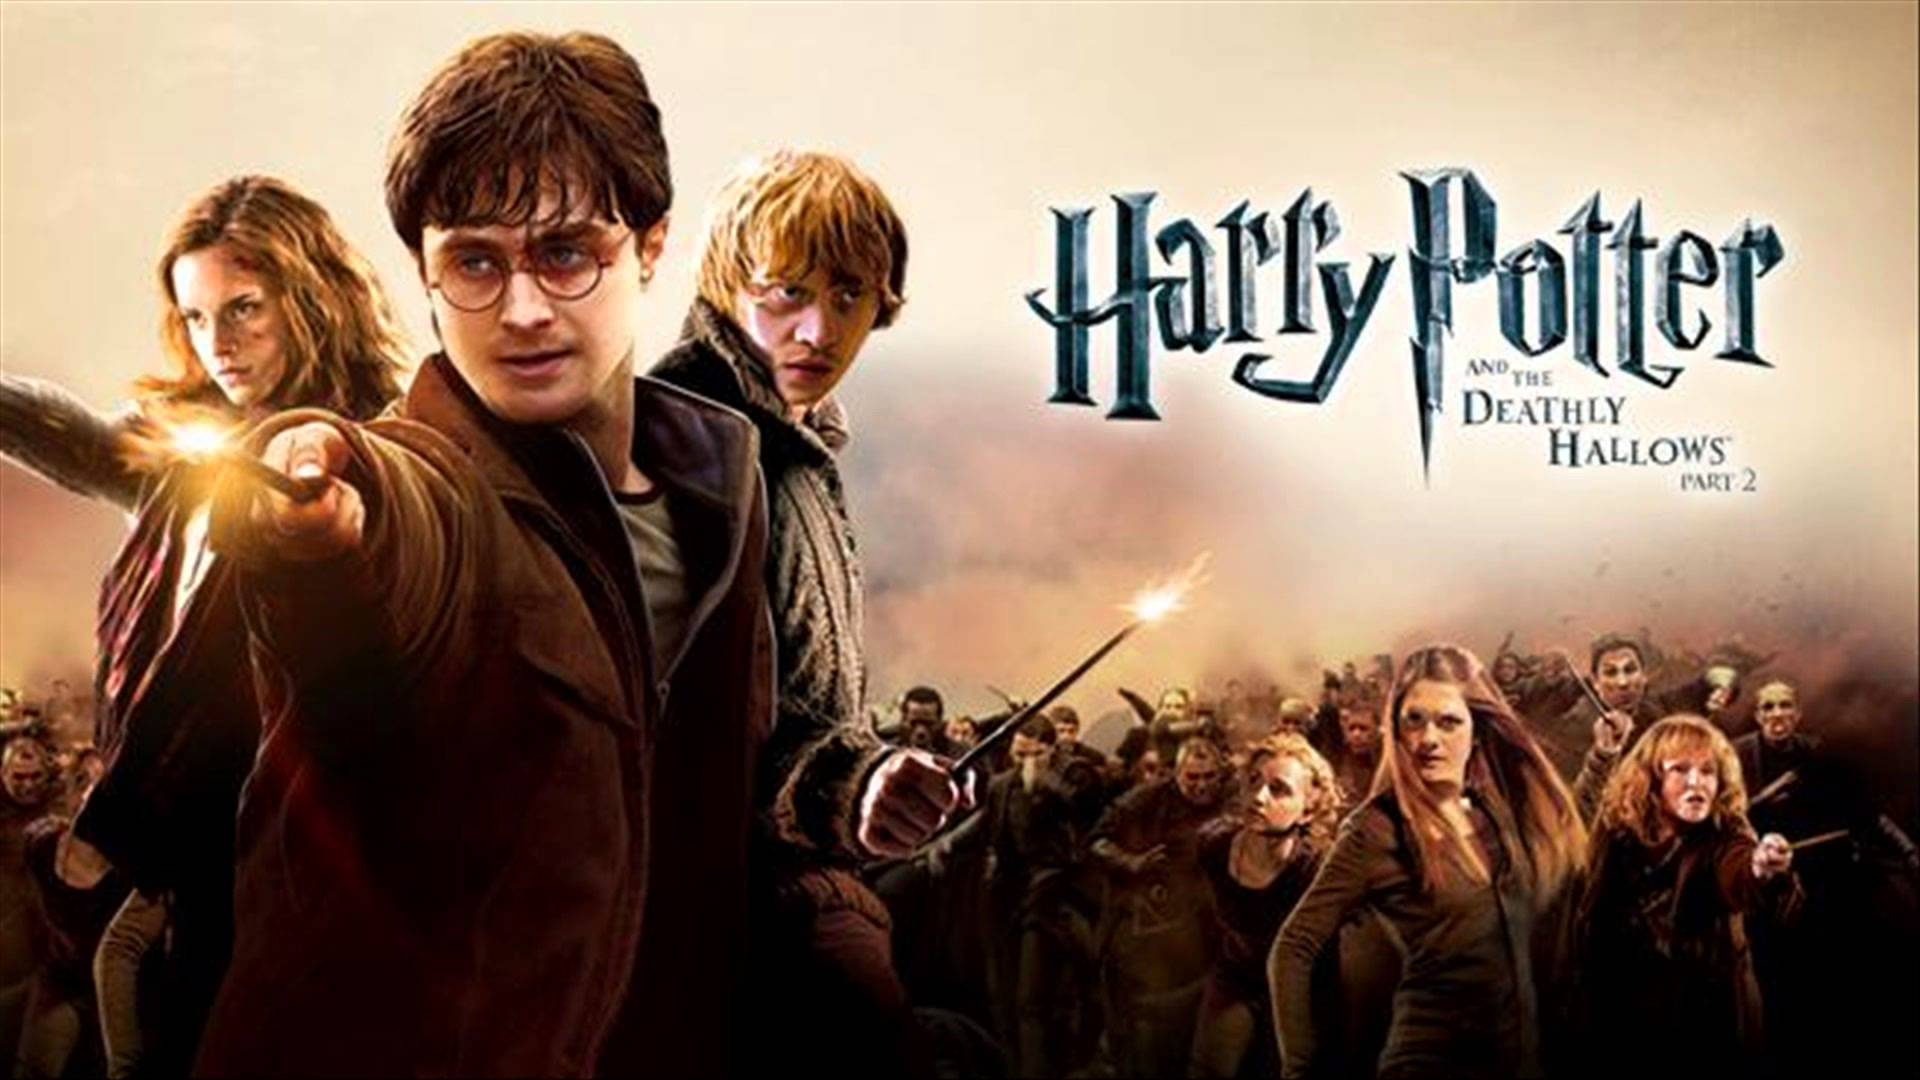 High Resolution Wallpaper | Harry Potter And The Deathly Hallows: Part 2 1920x1080 px